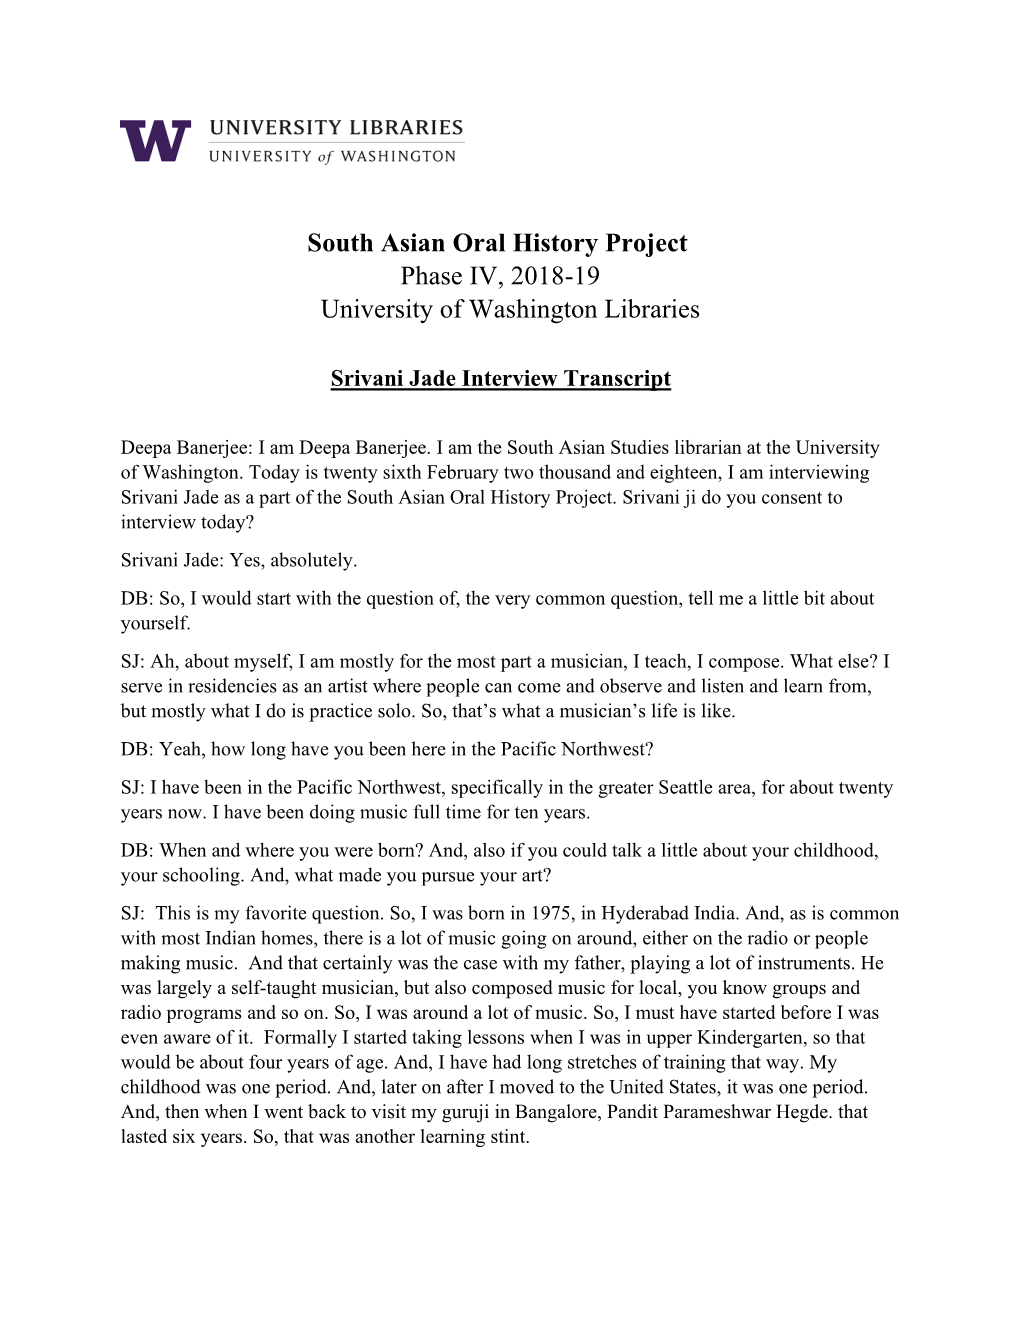 South Asian Oral History Project Phase IV, 2018-19 University of Washington Libraries